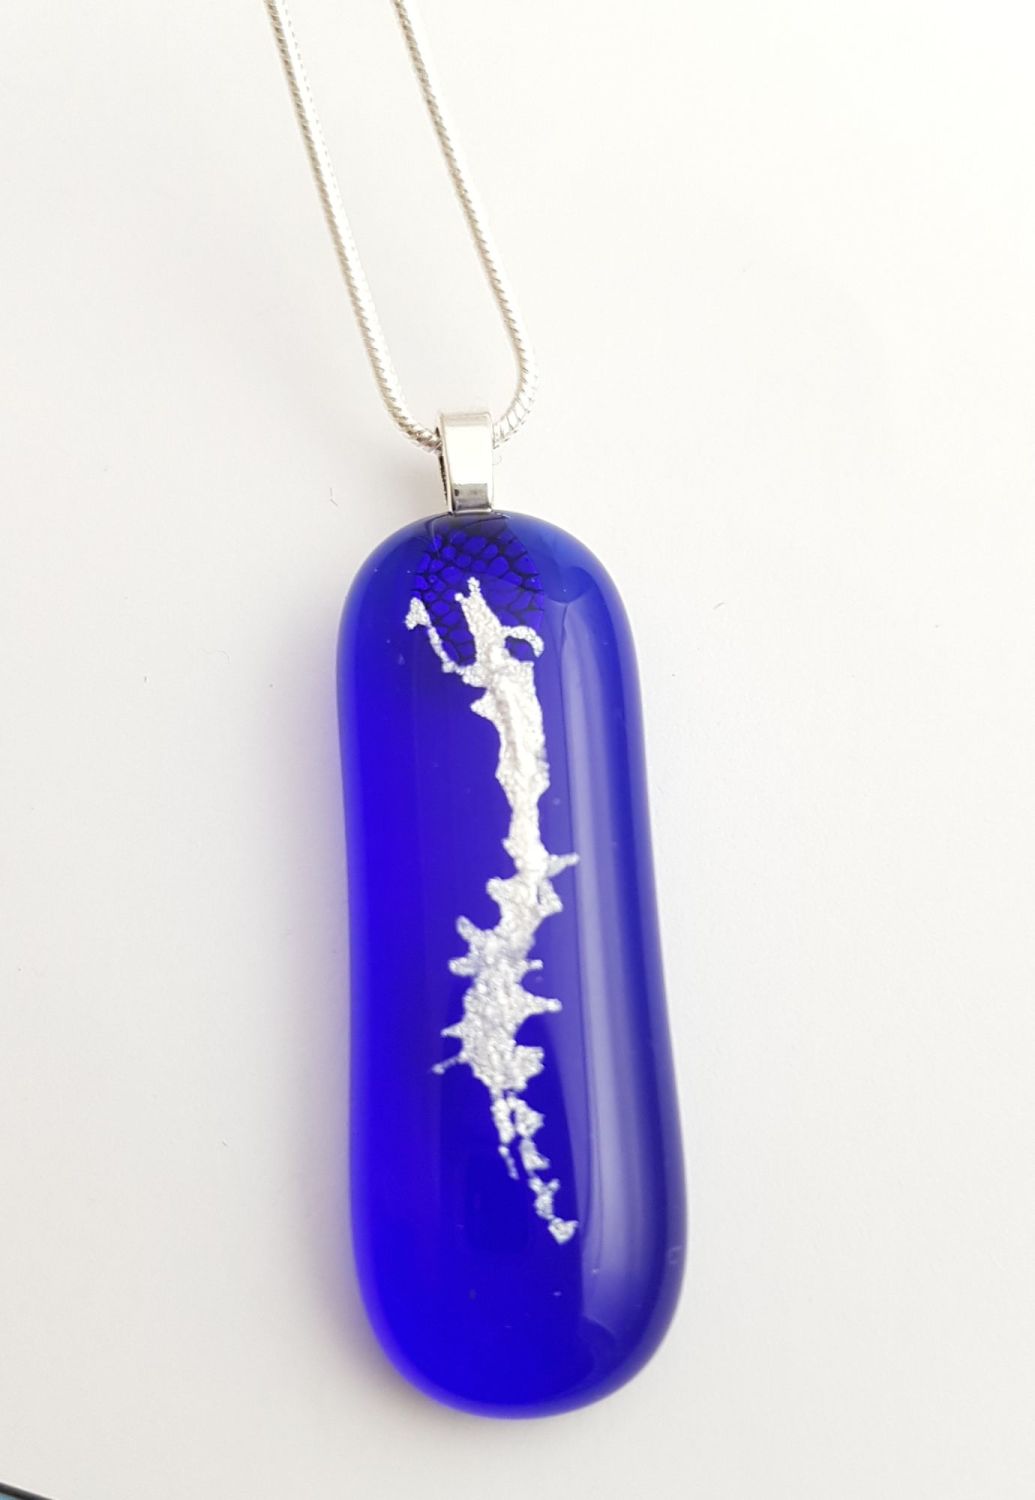 Mica - Cobalt blue with silver pendant